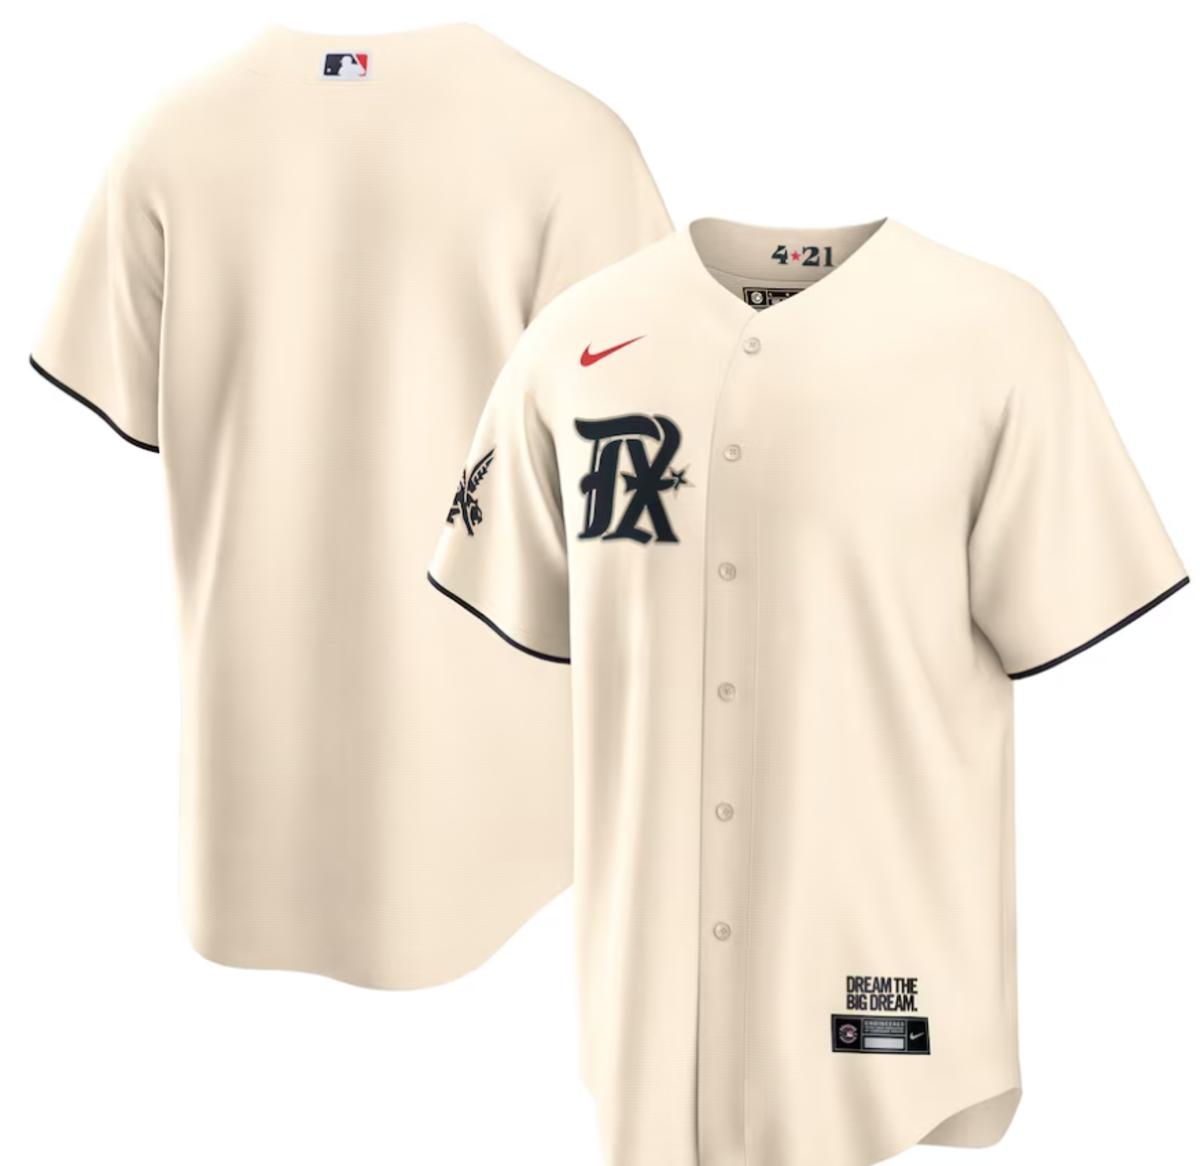 city connect jersey phillies